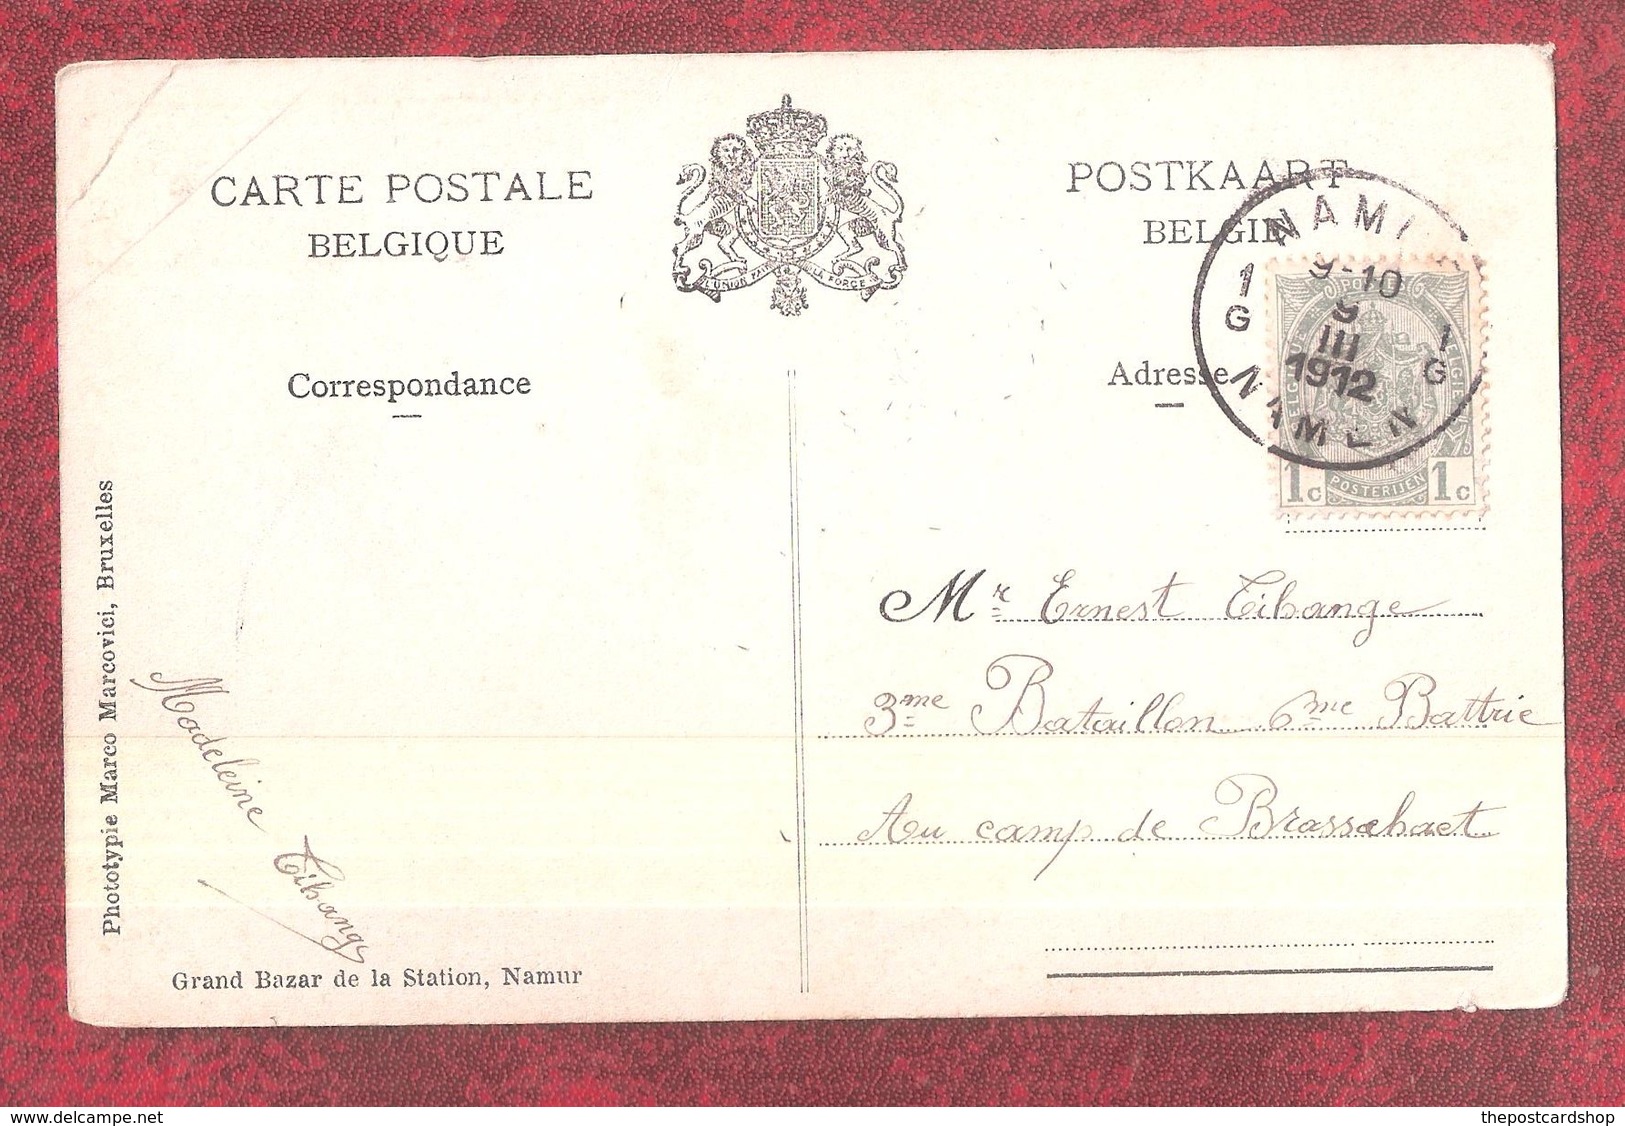 MILITARY INTEREST PRE WWI AMITIES DE NAMUR USED 1912 WITH STAMP CARD SENT TO SOLDIER - Namur